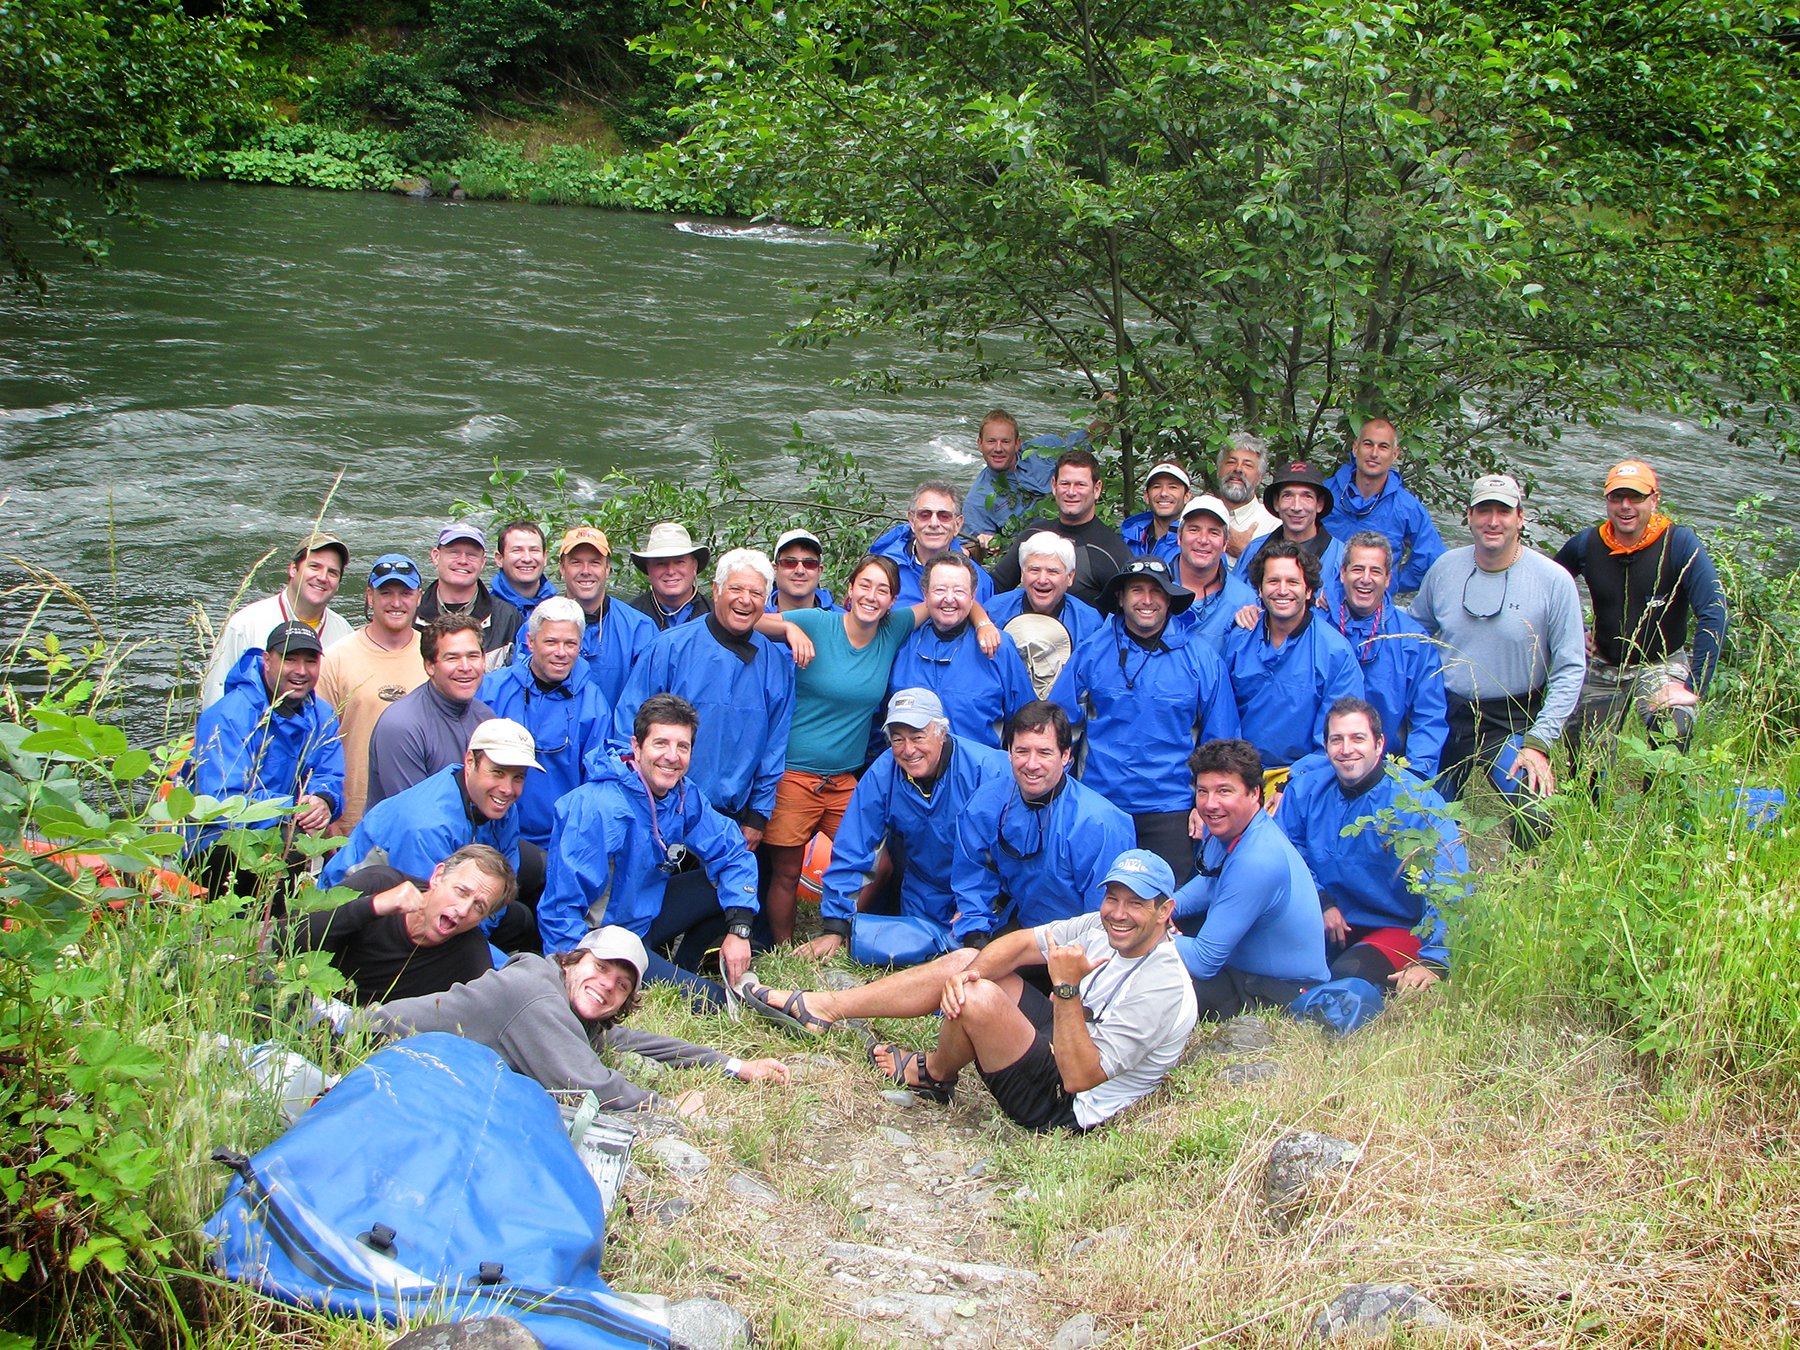 Large corporate group gathers for photo on whitewater rafting trip